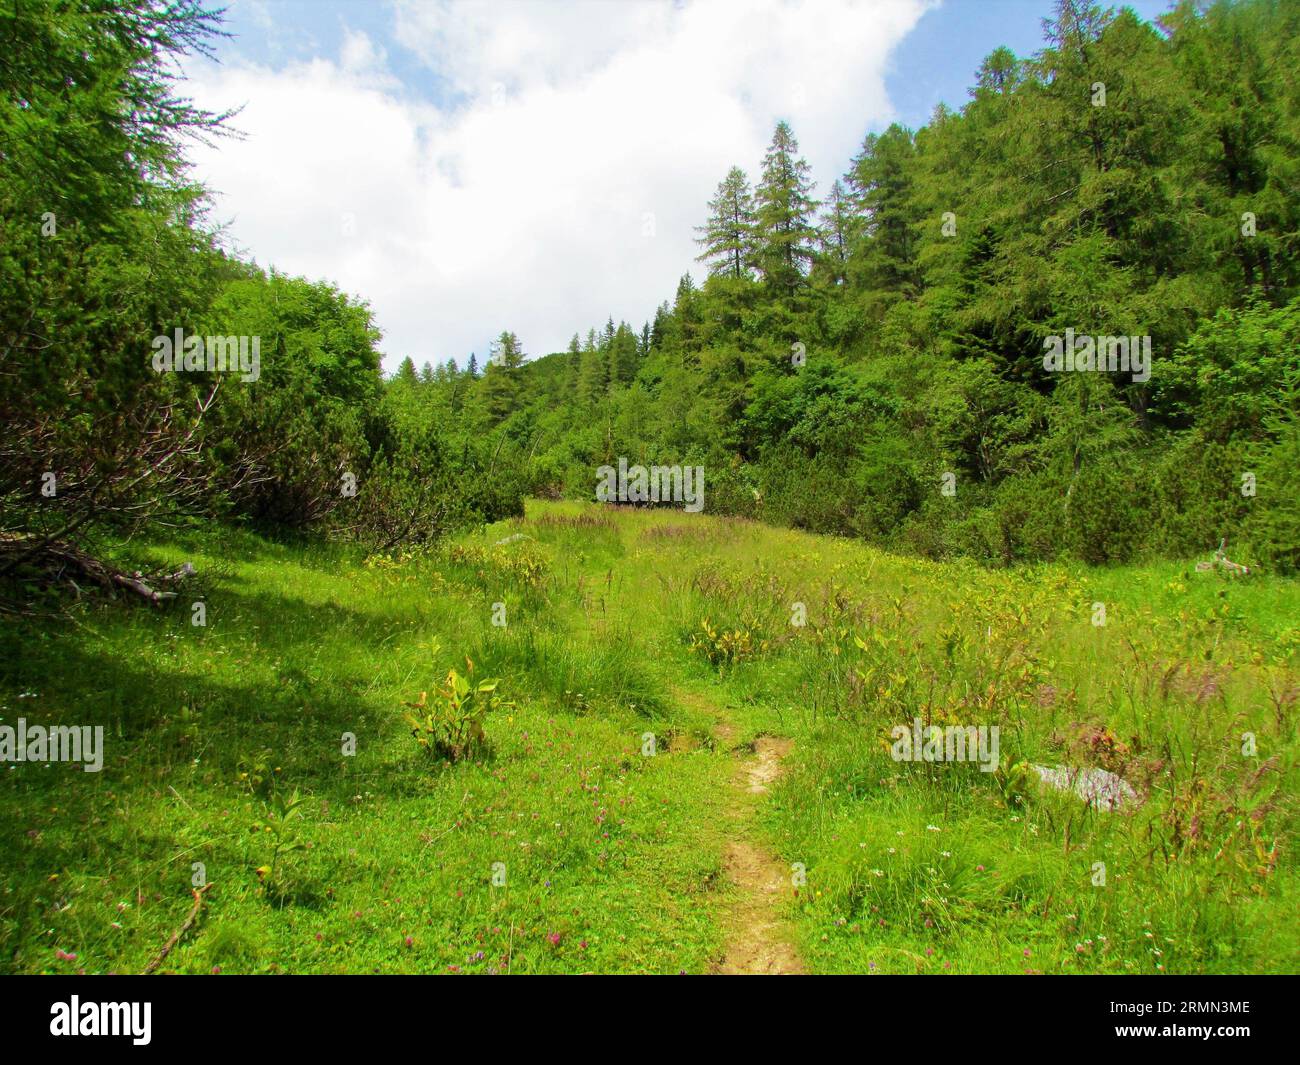 Alpine grassy meadow in Slovenia surrounded by larch forest and creeping pine (Pinus mugo) Stock Photo